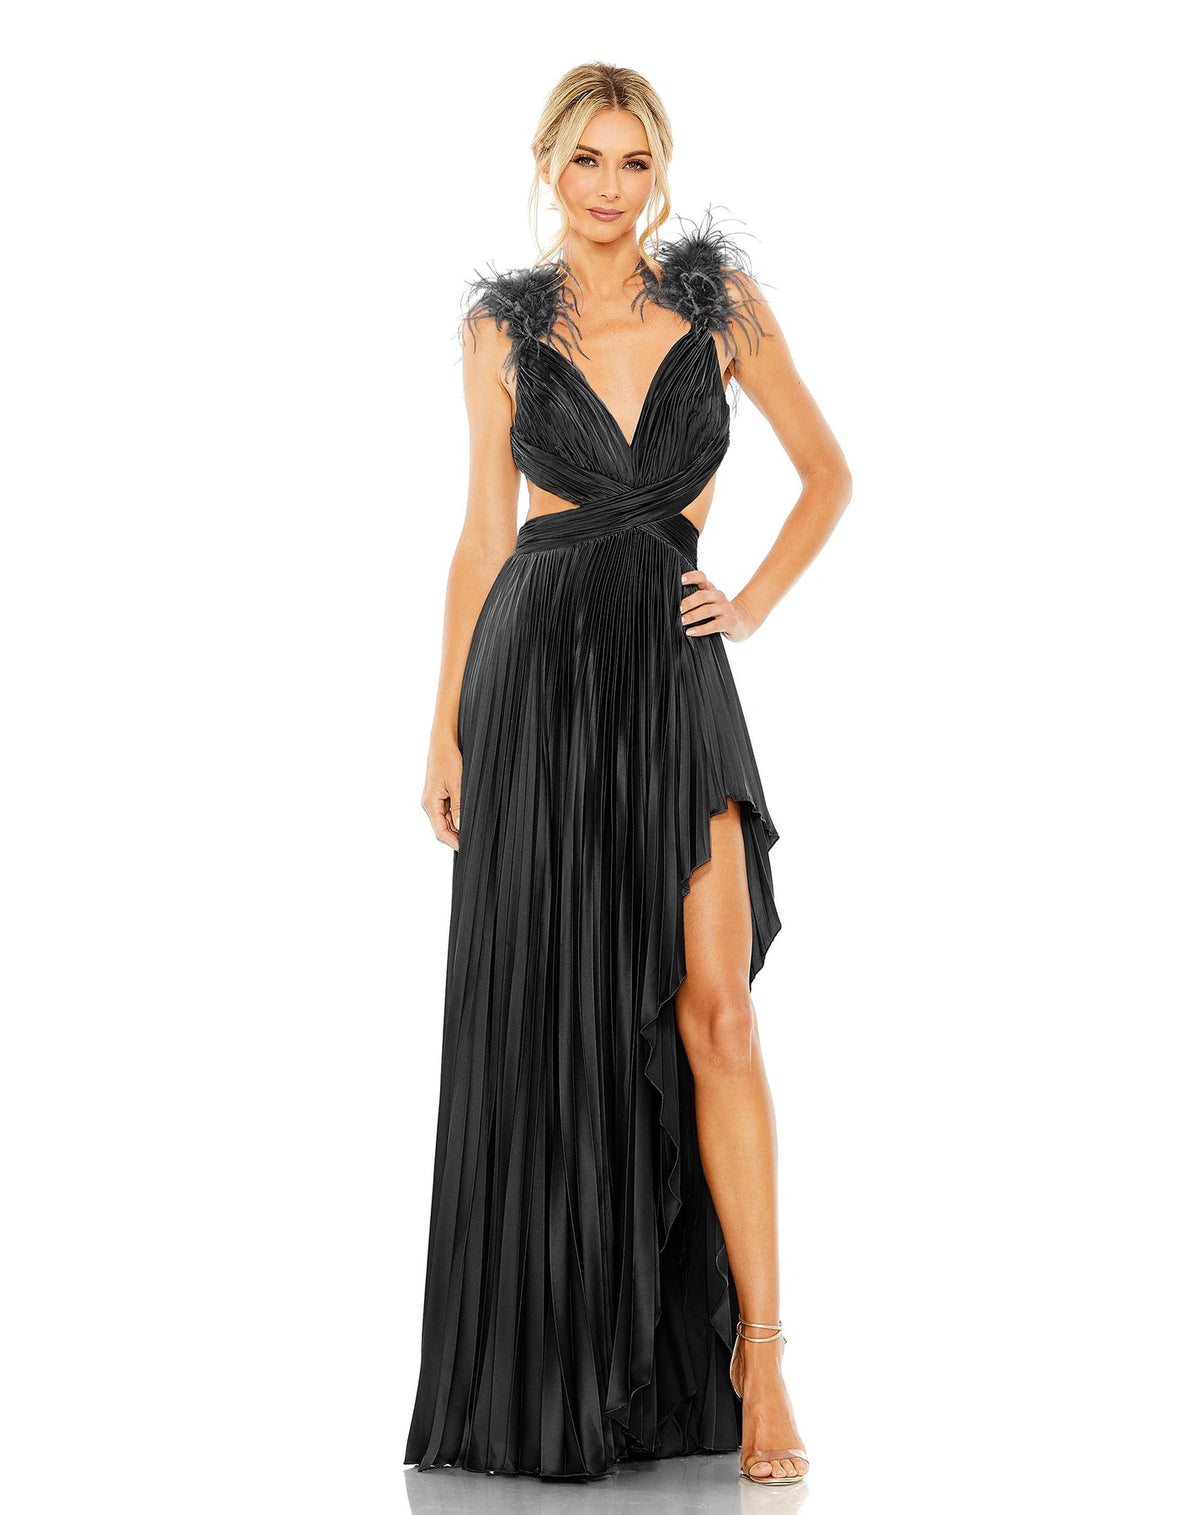 Ostrich feather detail cap sleeve cut out gown - Brown